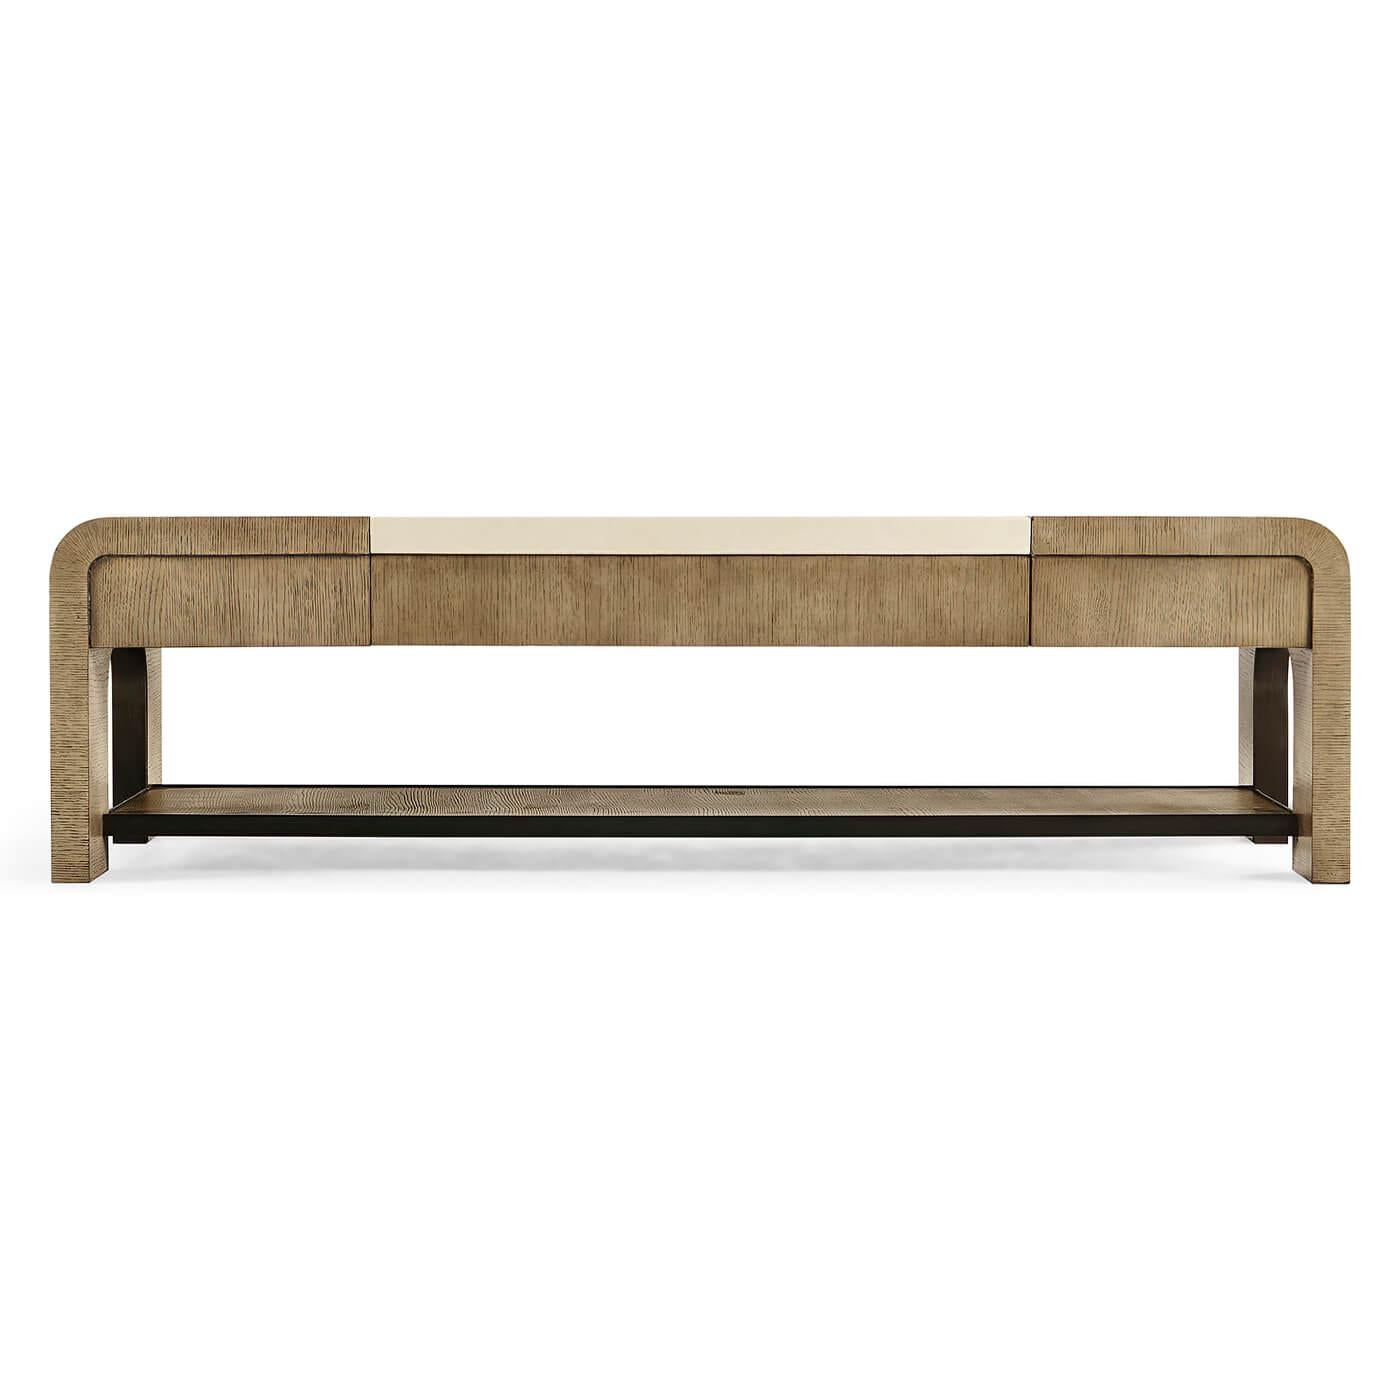 A modern coffee table, constructed from American white oak with a lightly textured ceruse finish. The table features rift cut veneers and a leather inlay. The shelf is framed in brass trim with a dark, rich patina and the table has a center